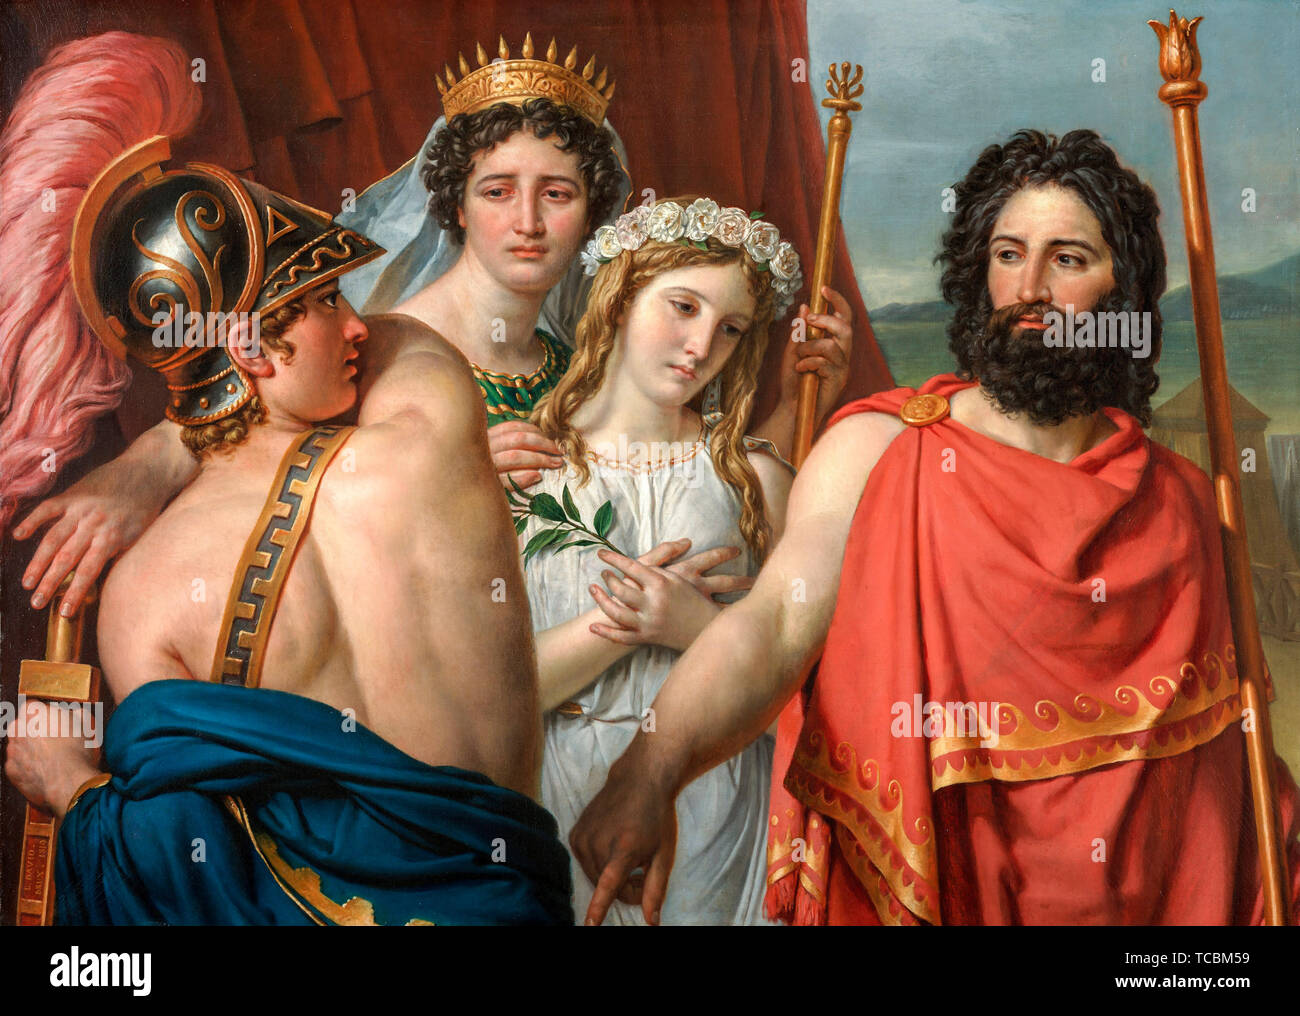 Jacques Louis David, The Anger of Achilles, painting, 1819 Stock Photo